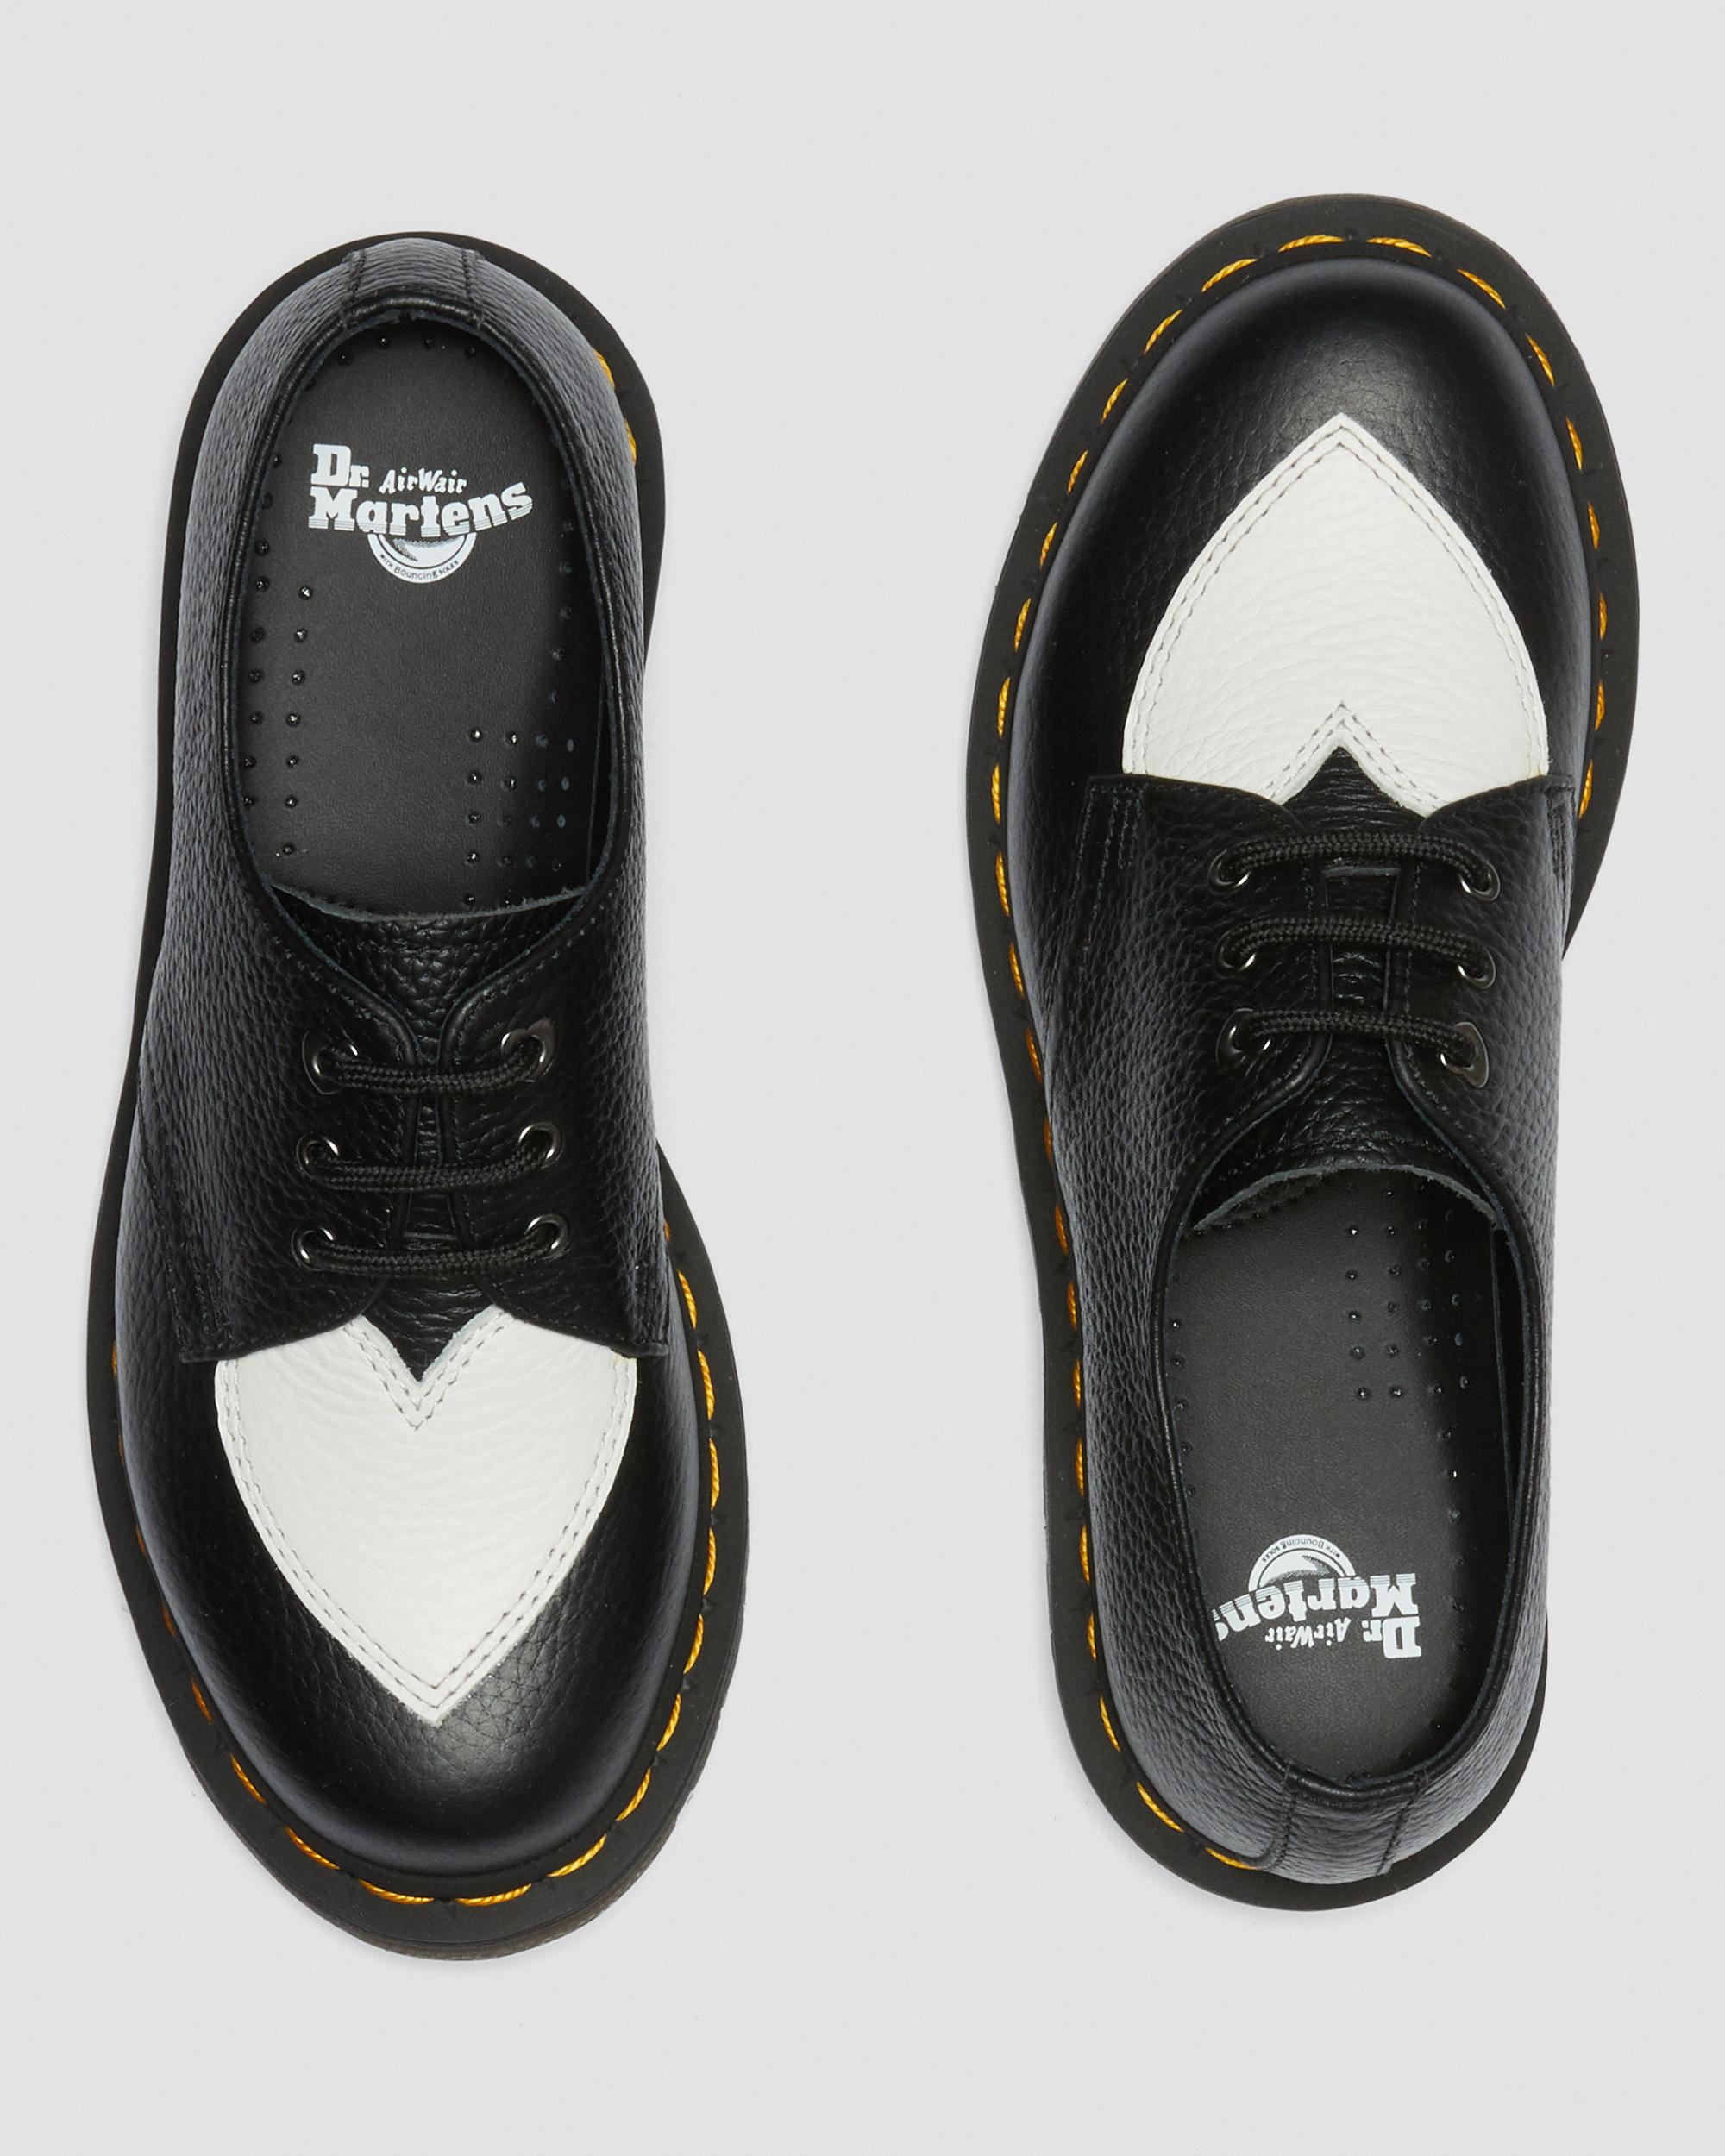 DR MARTENS 1461 Amore Leather Oxford Shoes